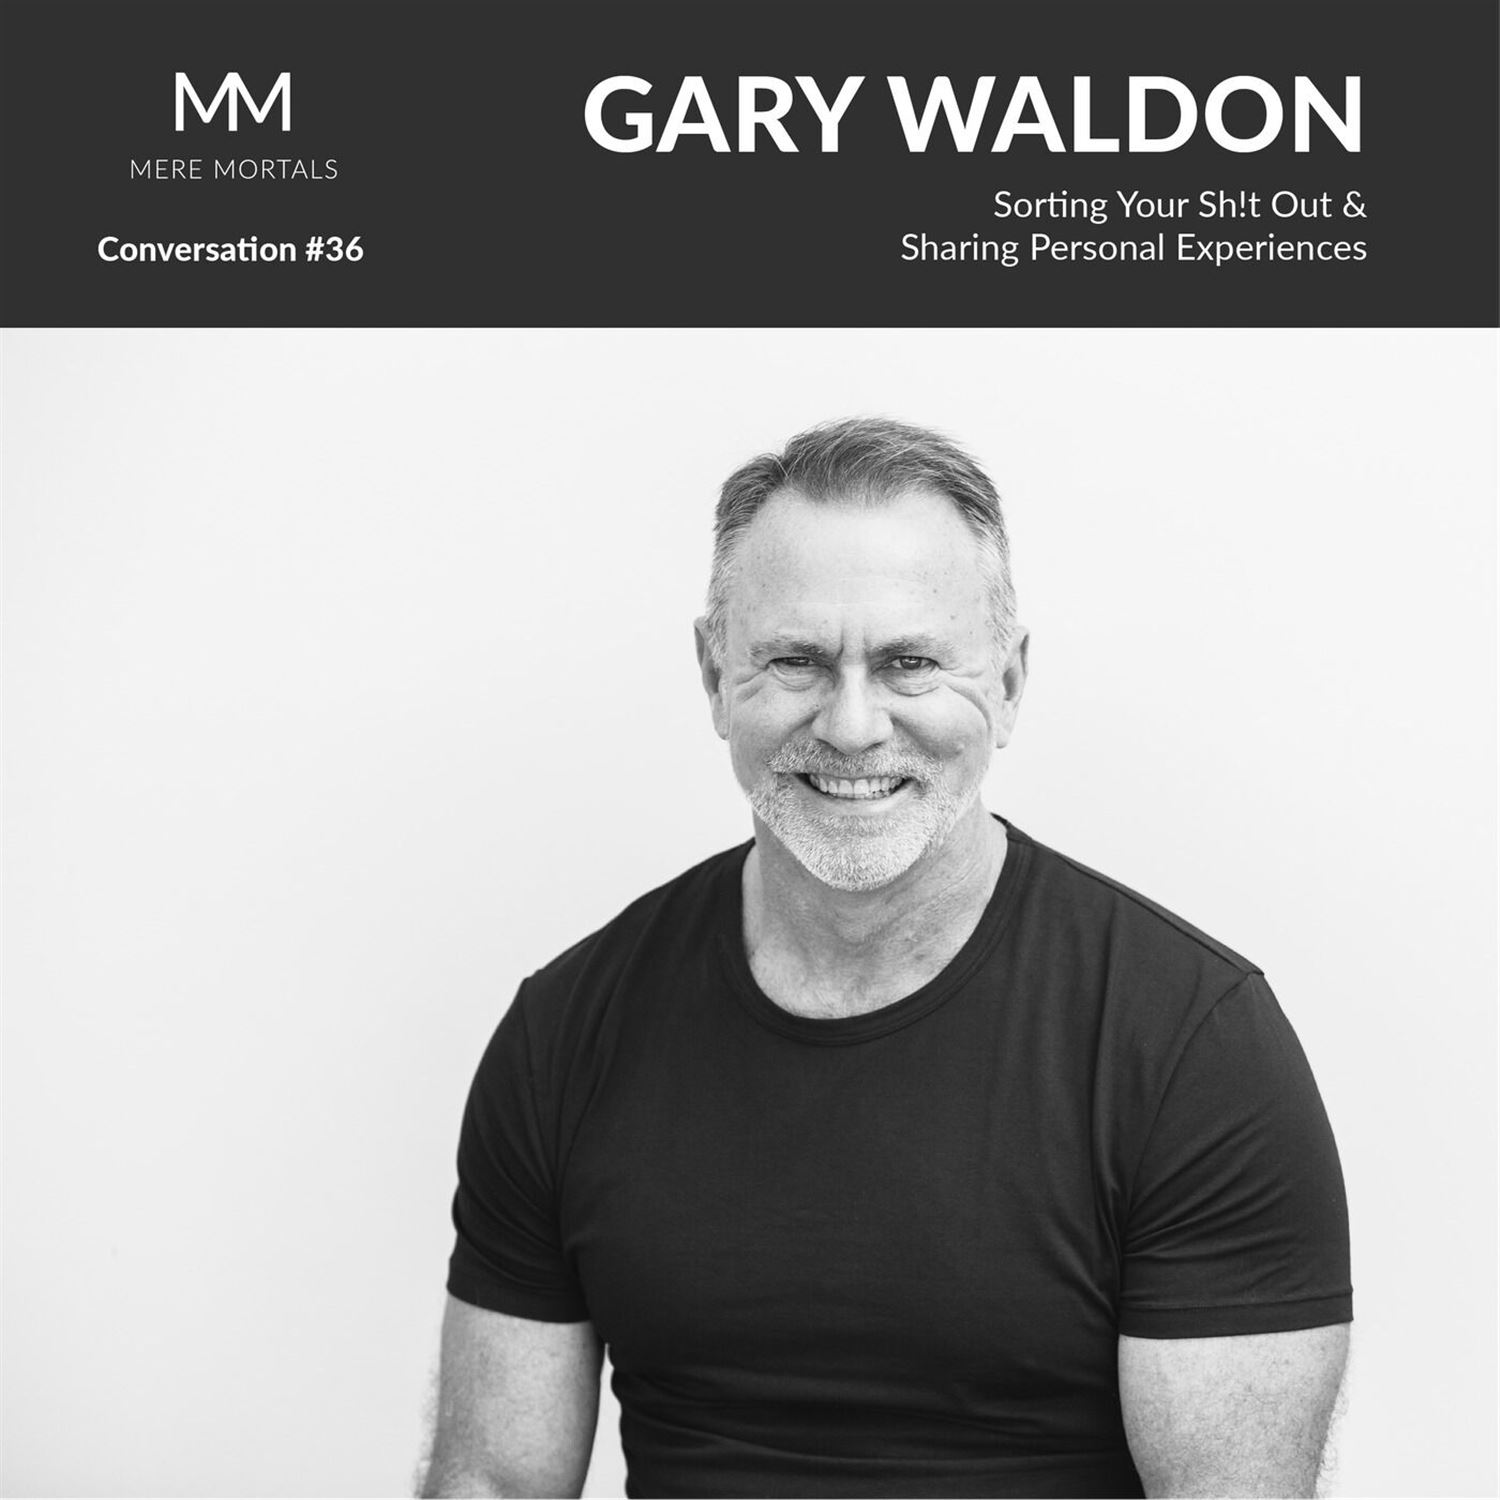 GARY WALDON | Sorting Your Sh!t Out & Sharing Personal Experiences: Mere Mortals Conversation #36